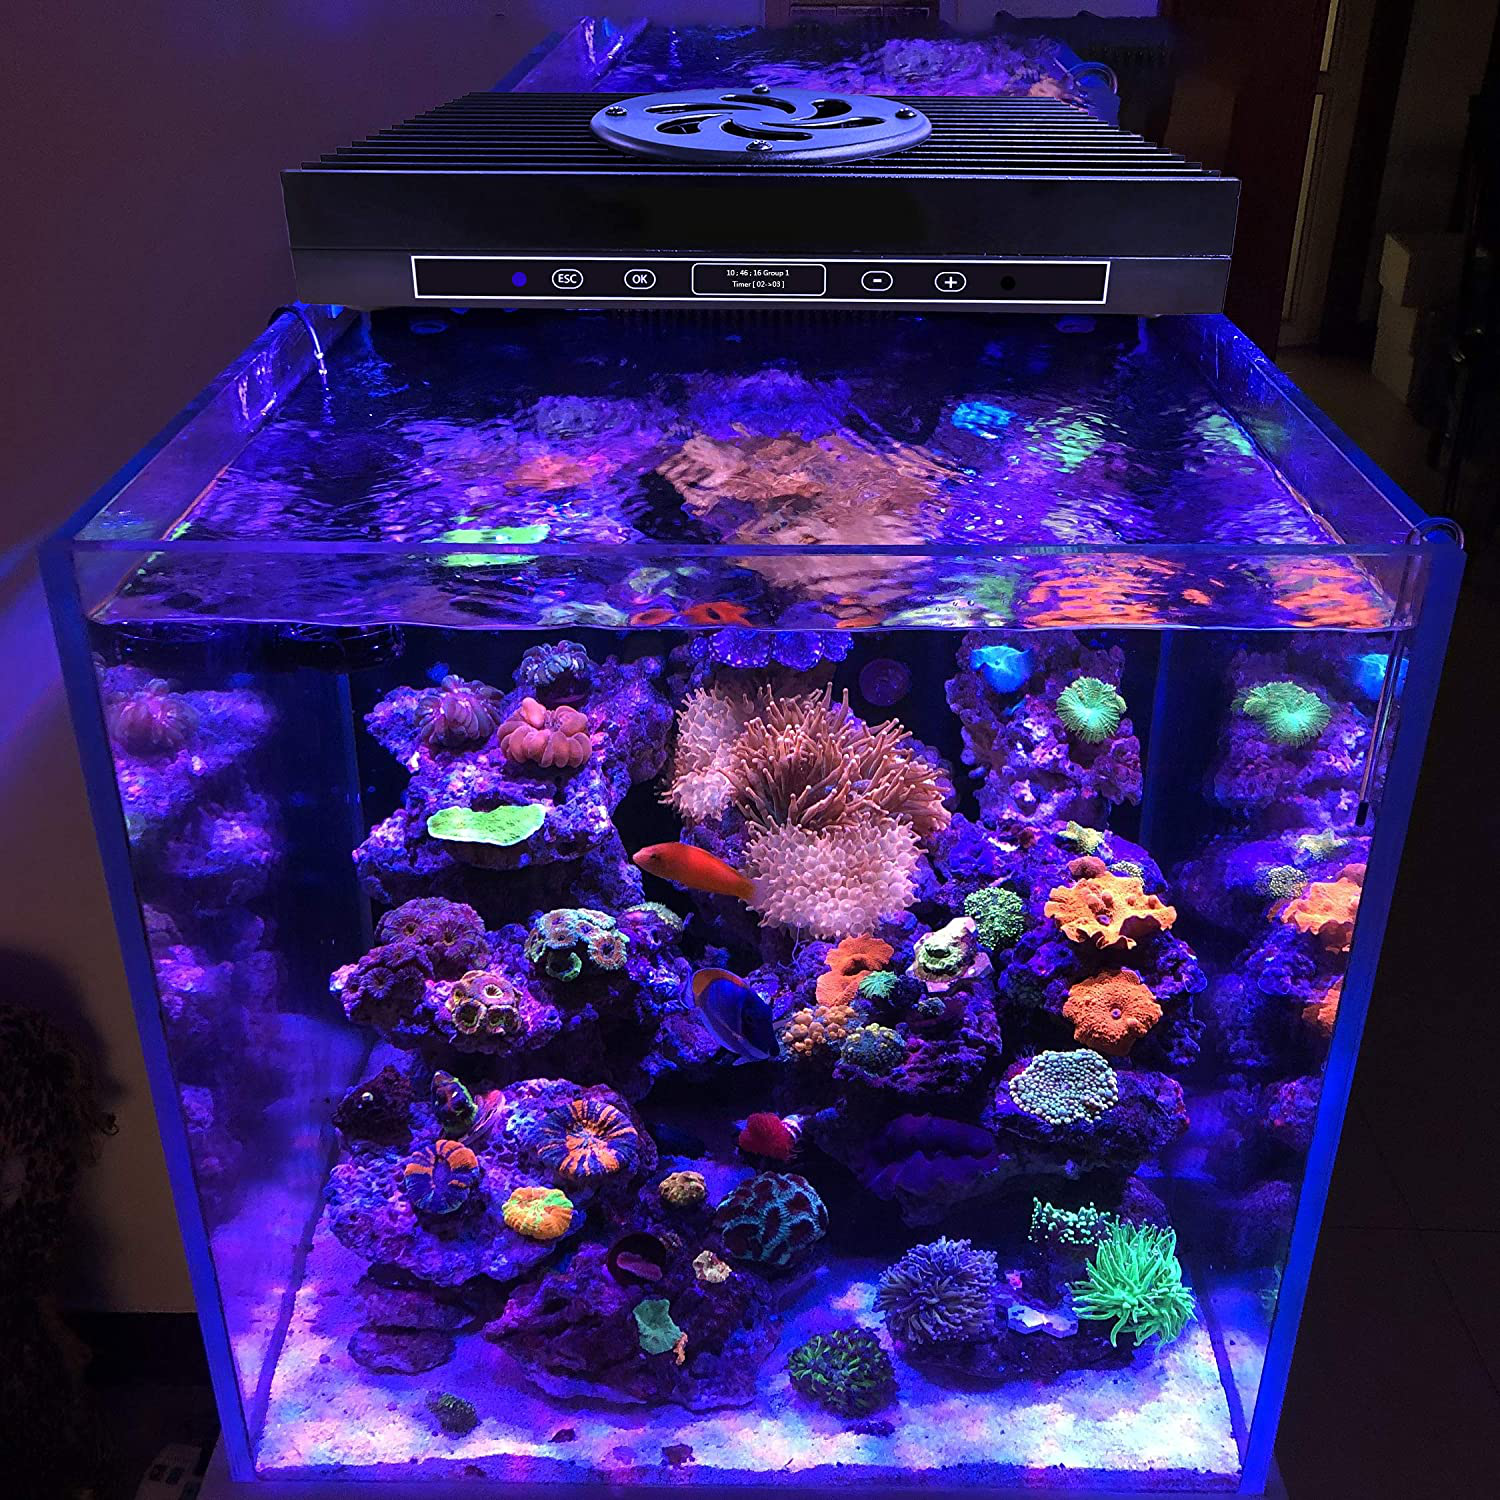 SMATFARM LED Aquarium Light - Updated Program Coral Reef Light Dimmable 95Watts (±5%) Full Spectrum Sunrise Sunset for Marine Fish Tanks Coral Reef Lamp with Timer Function